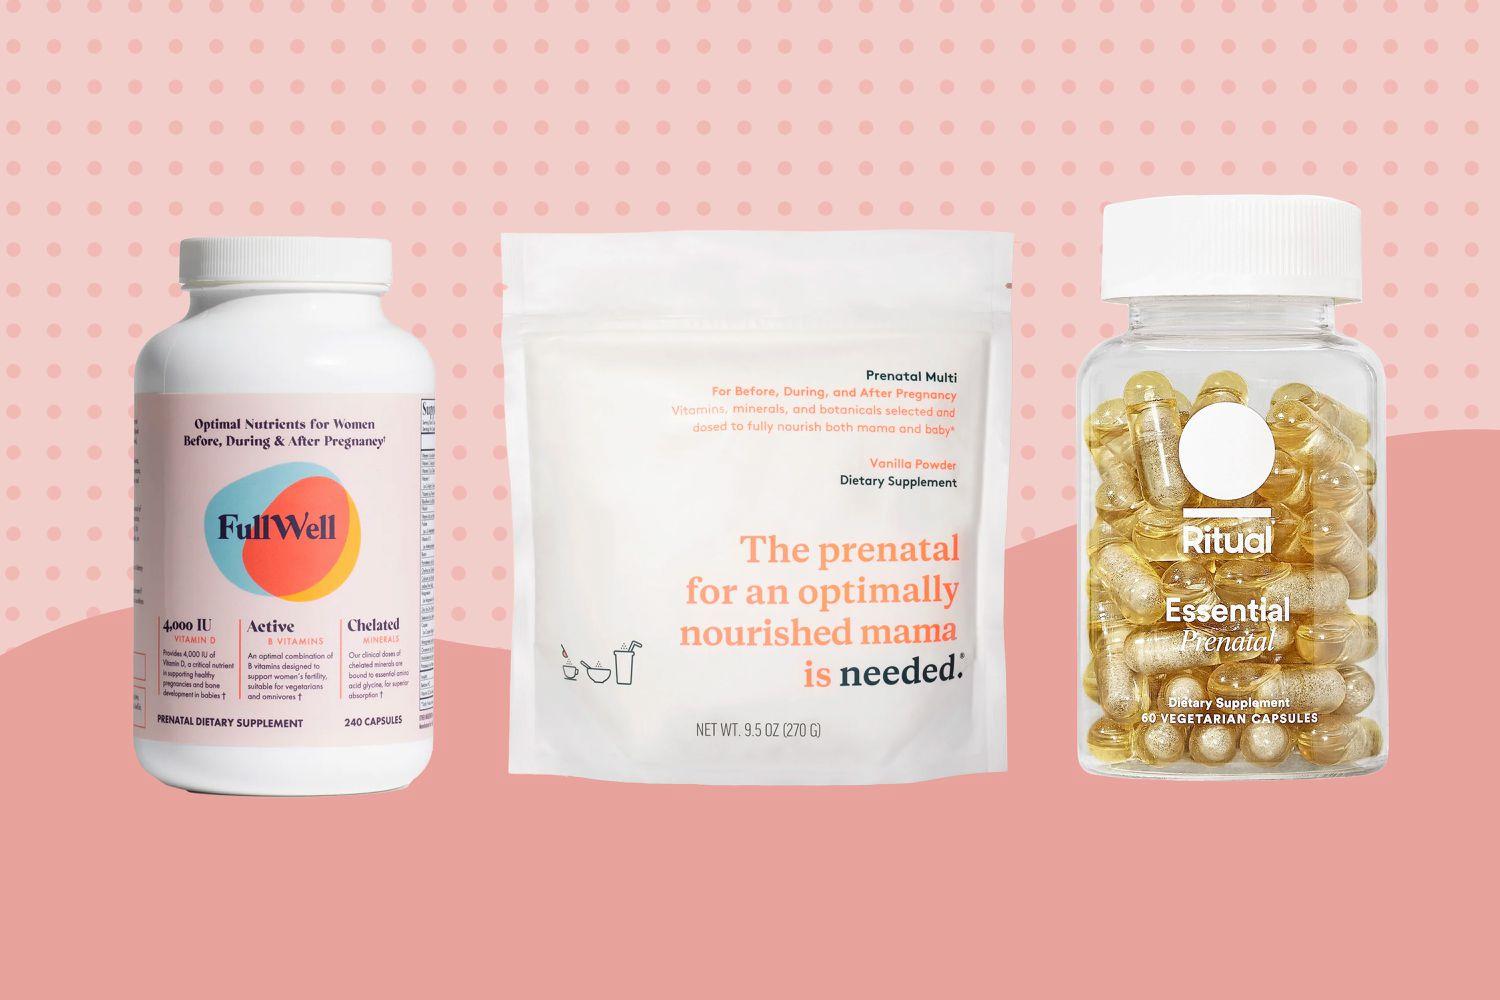 A variety of prenatal vitamins and supplements in bottles and a bag.